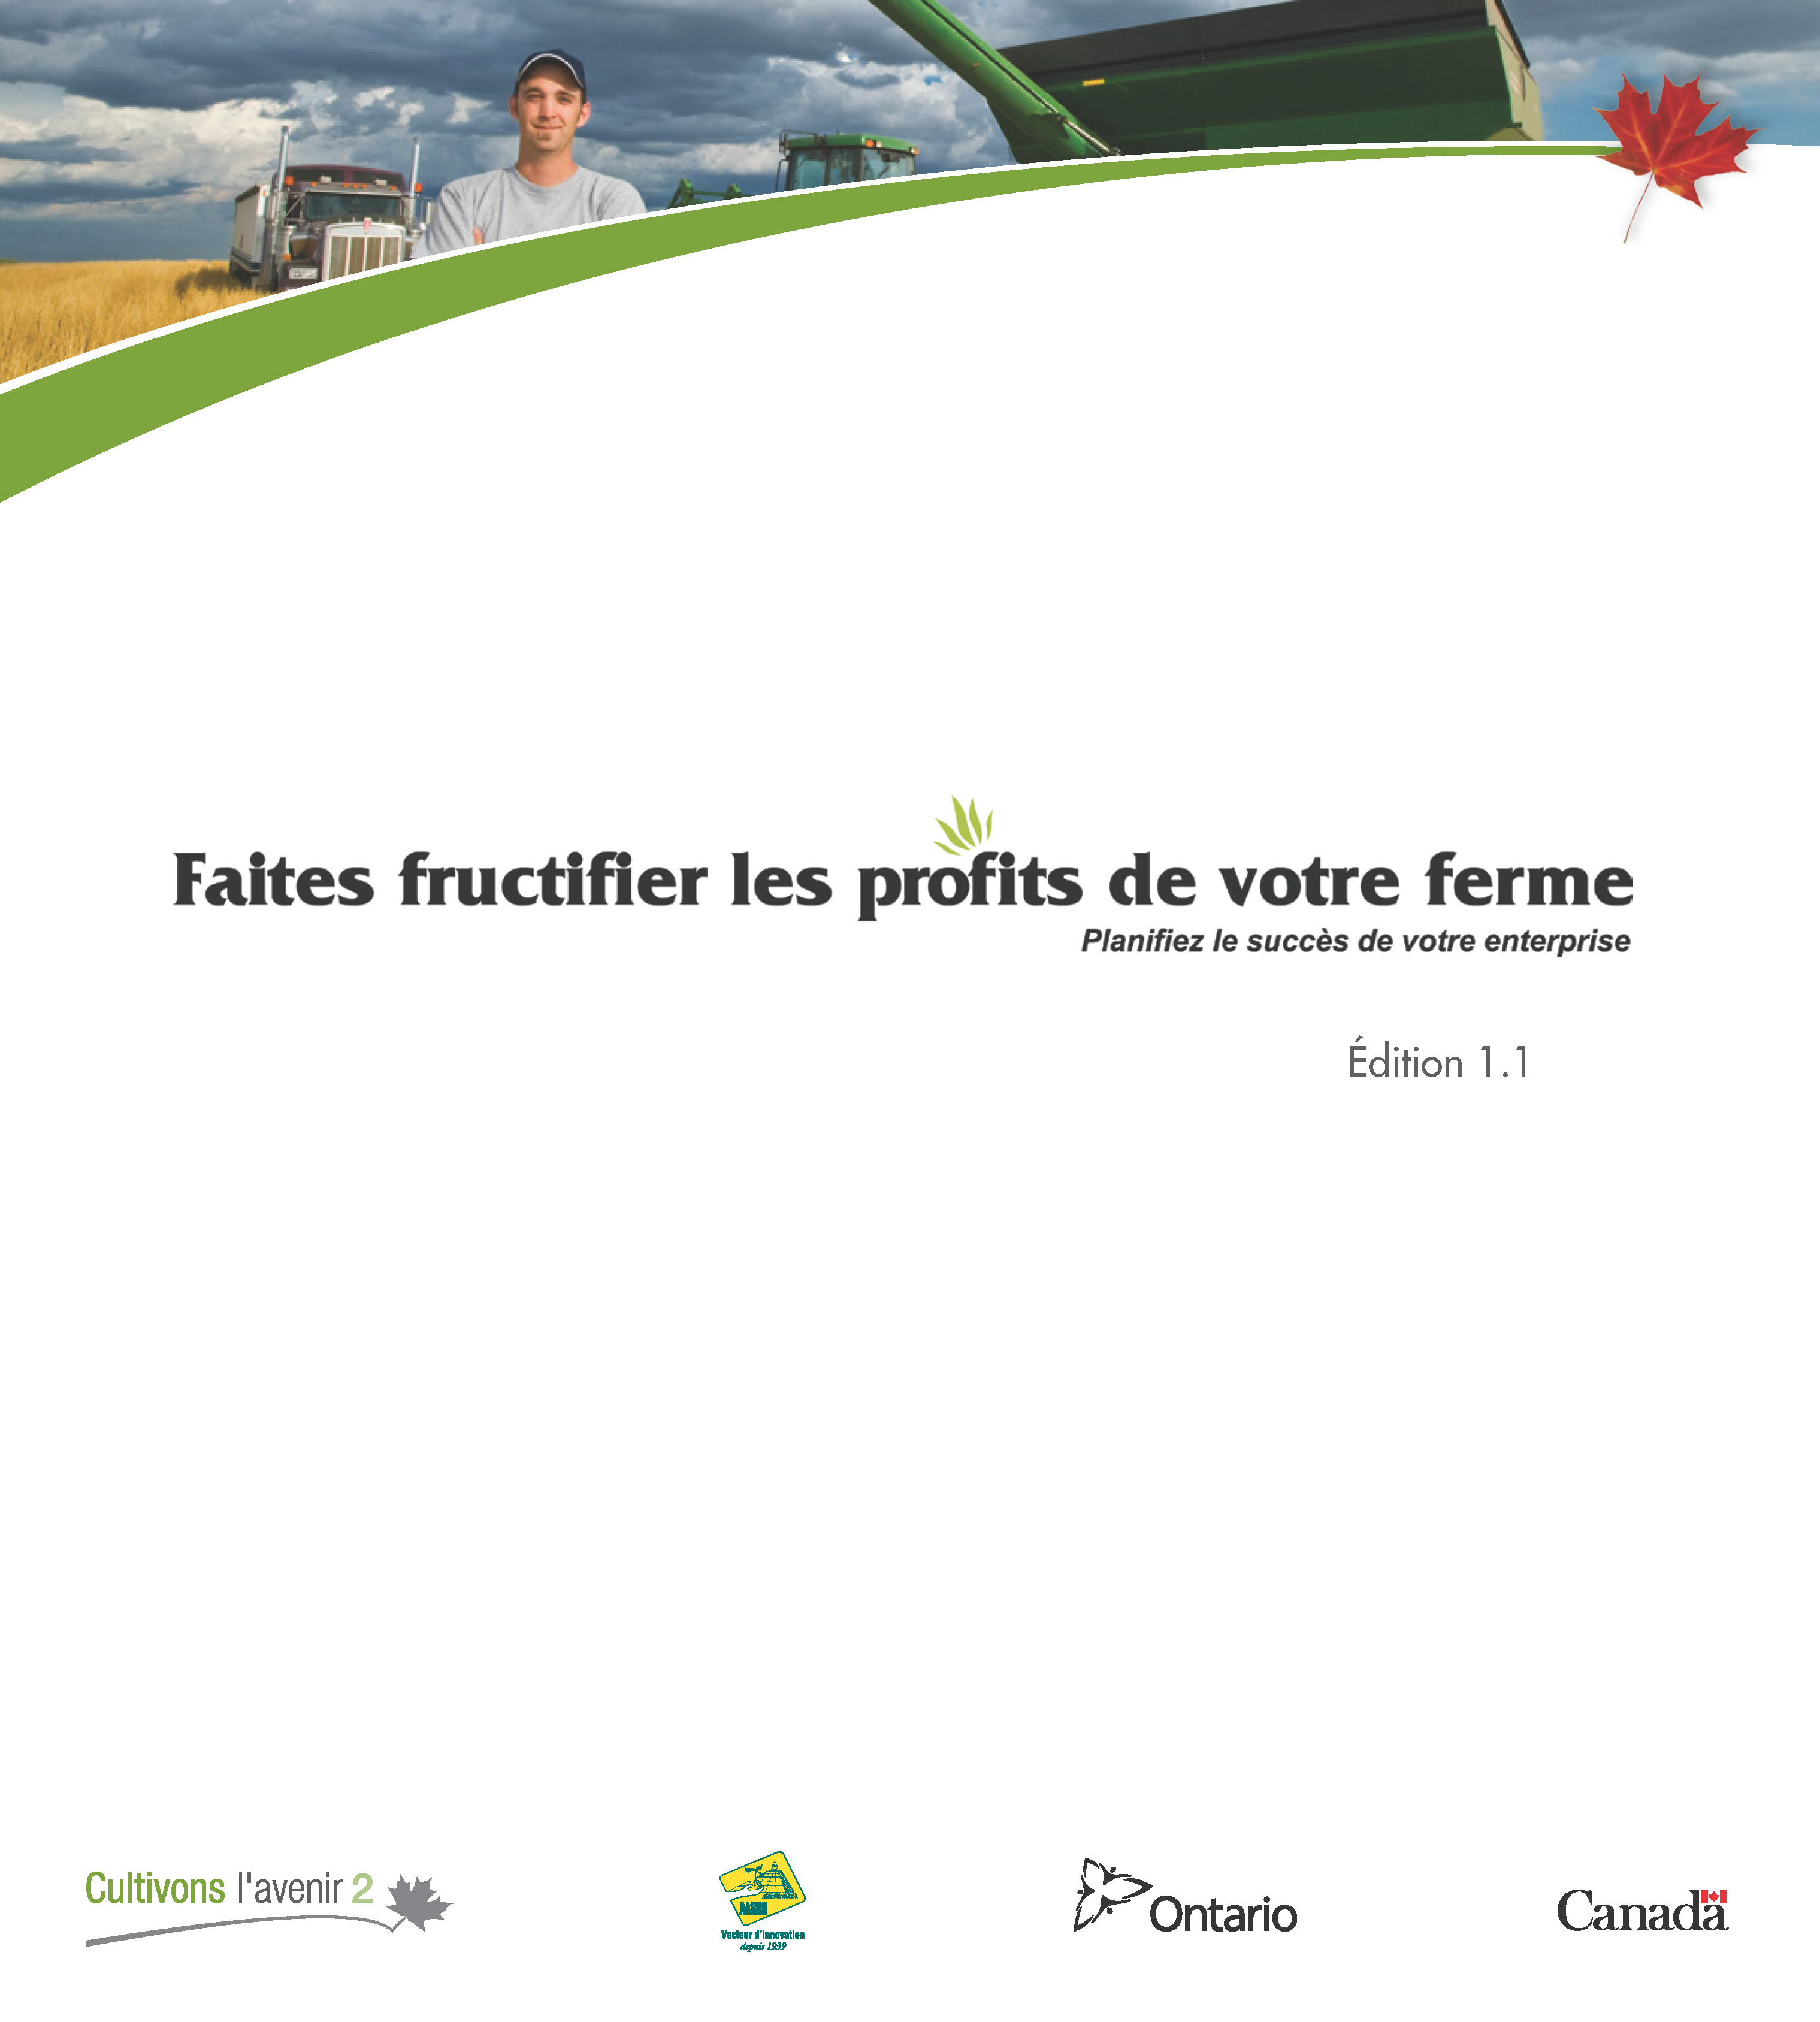 Growing Your Farm Profits workbook cover (French)